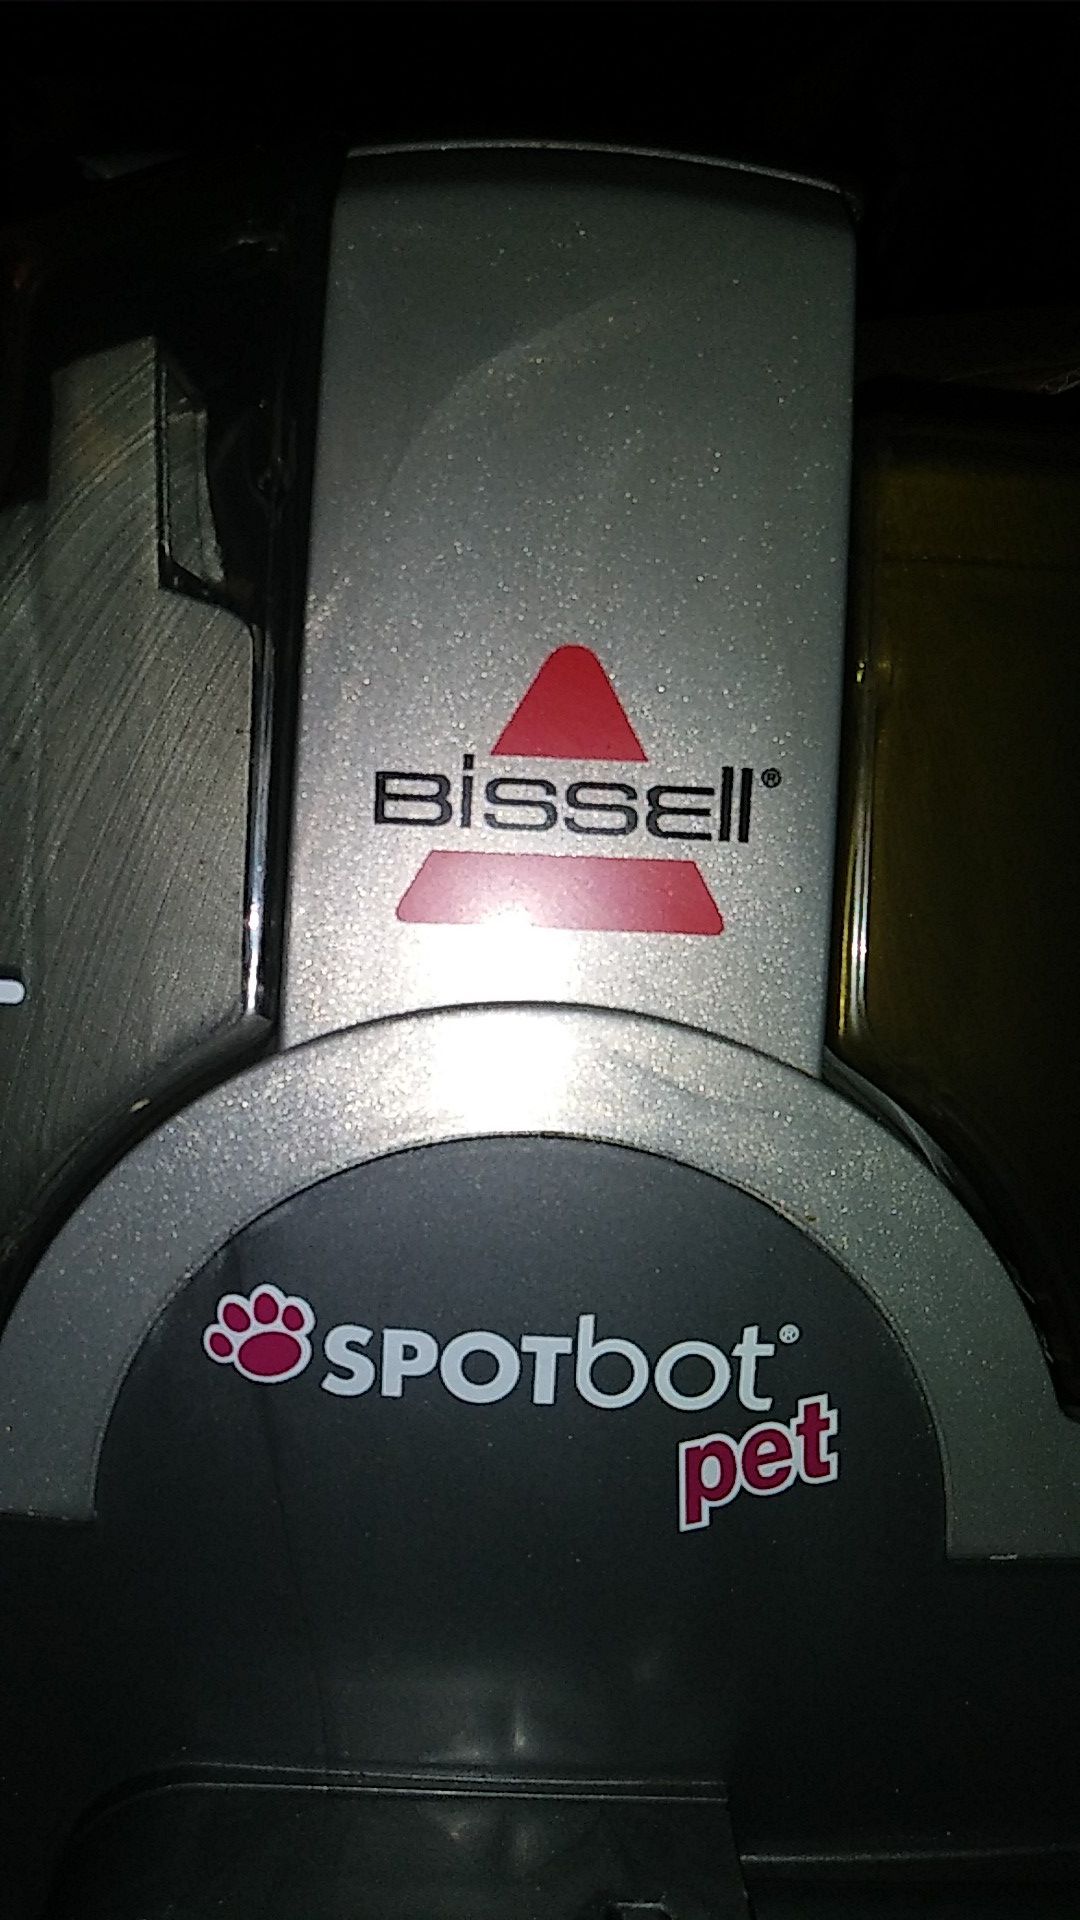 Hands free bissell Spotbot pet stain cleaner